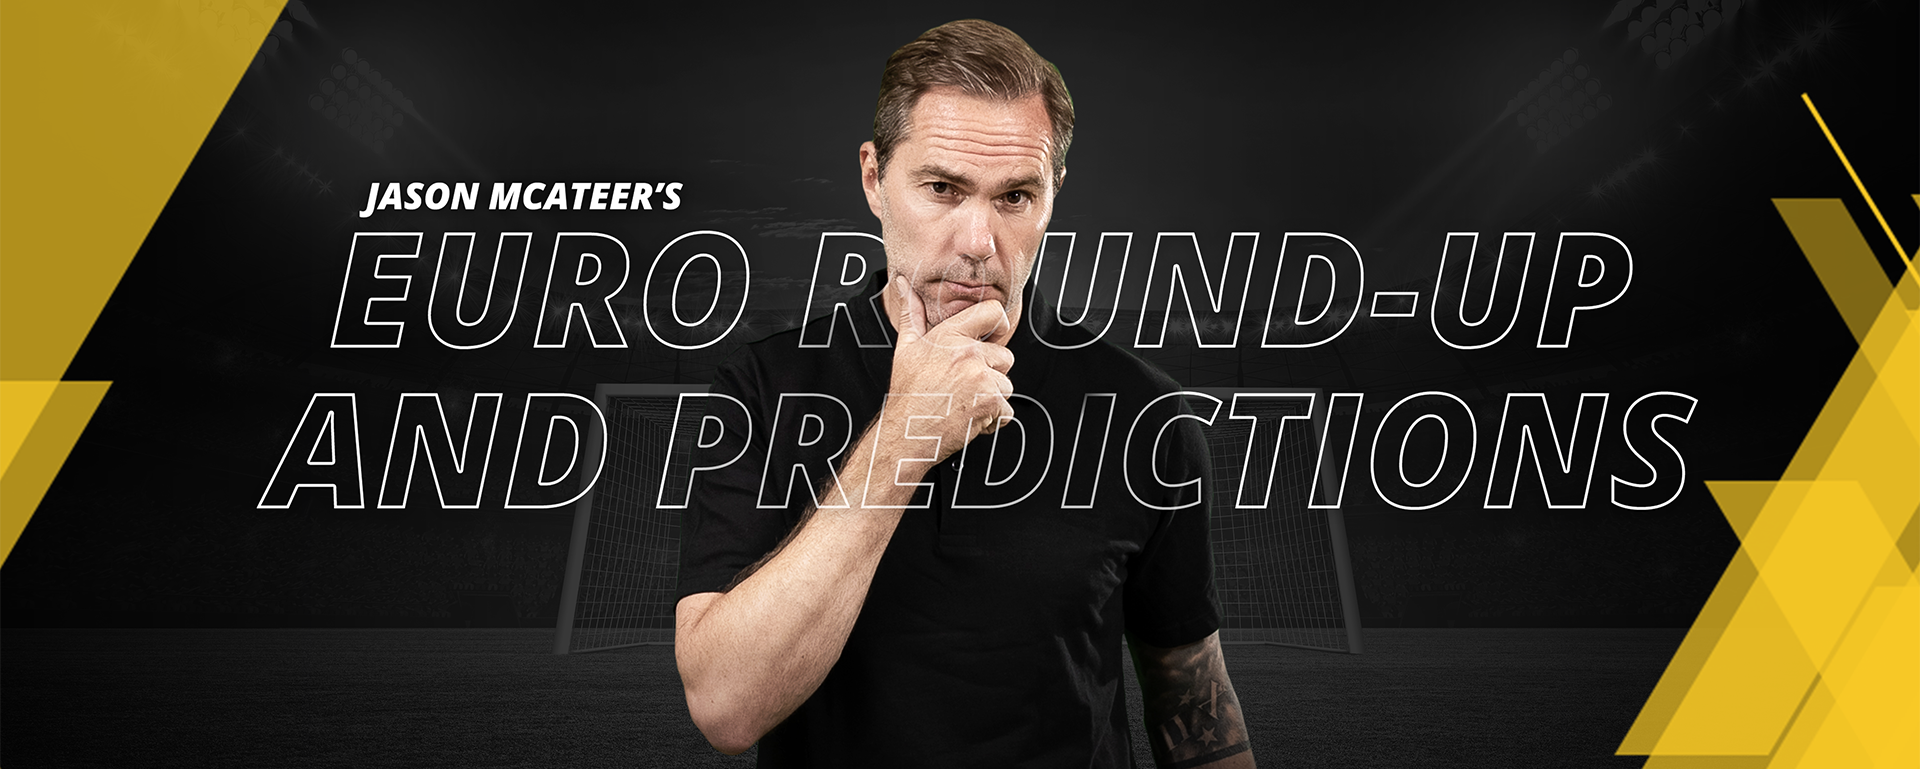 JASON MCATEER’S EURO ROUND-UP AND PREDICTIONS